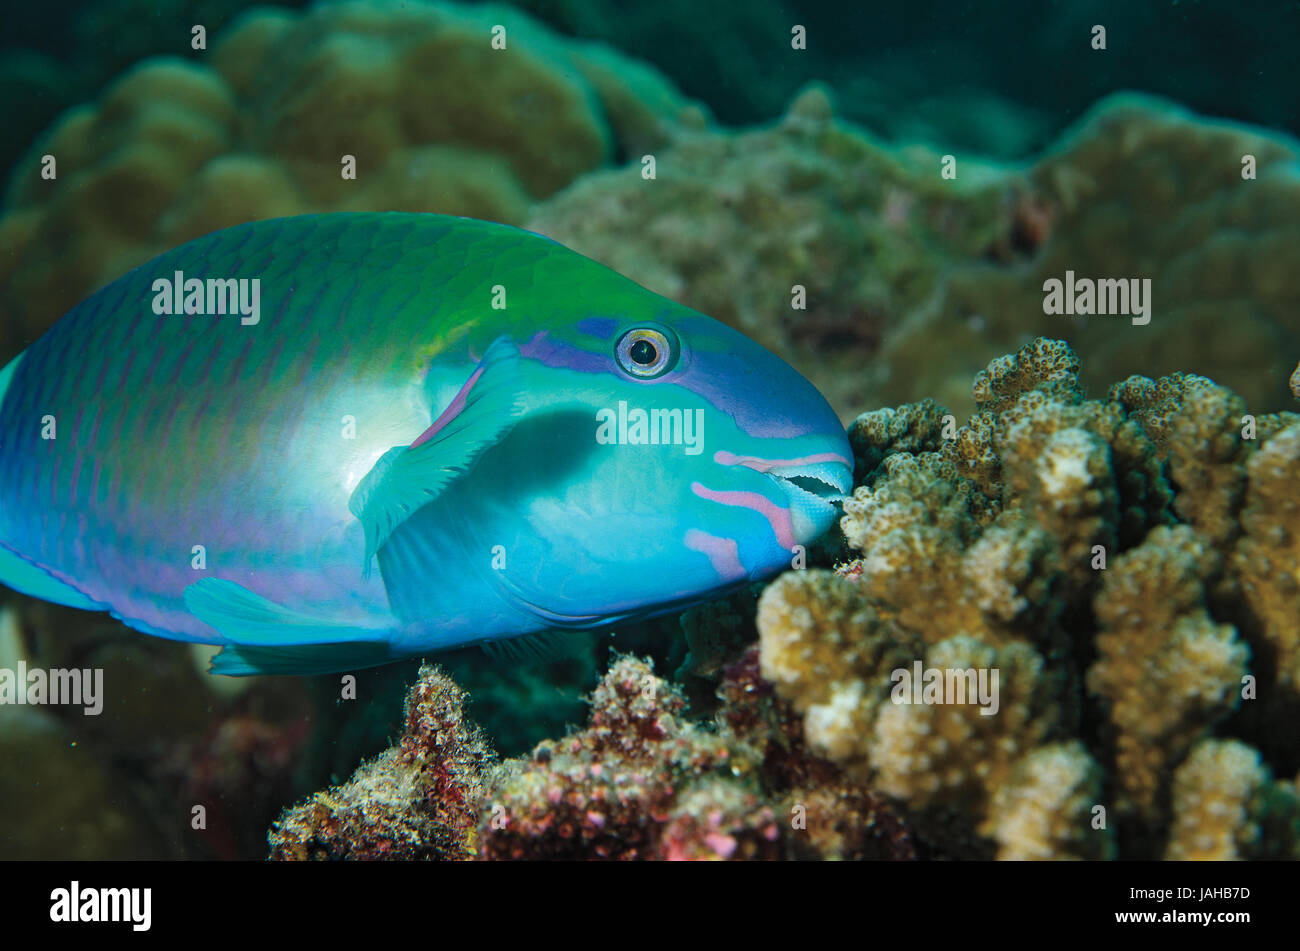 Bridled parrotfish, Scarus frenatus, eating coral in Maldives, Indian Ocean Stock Photo